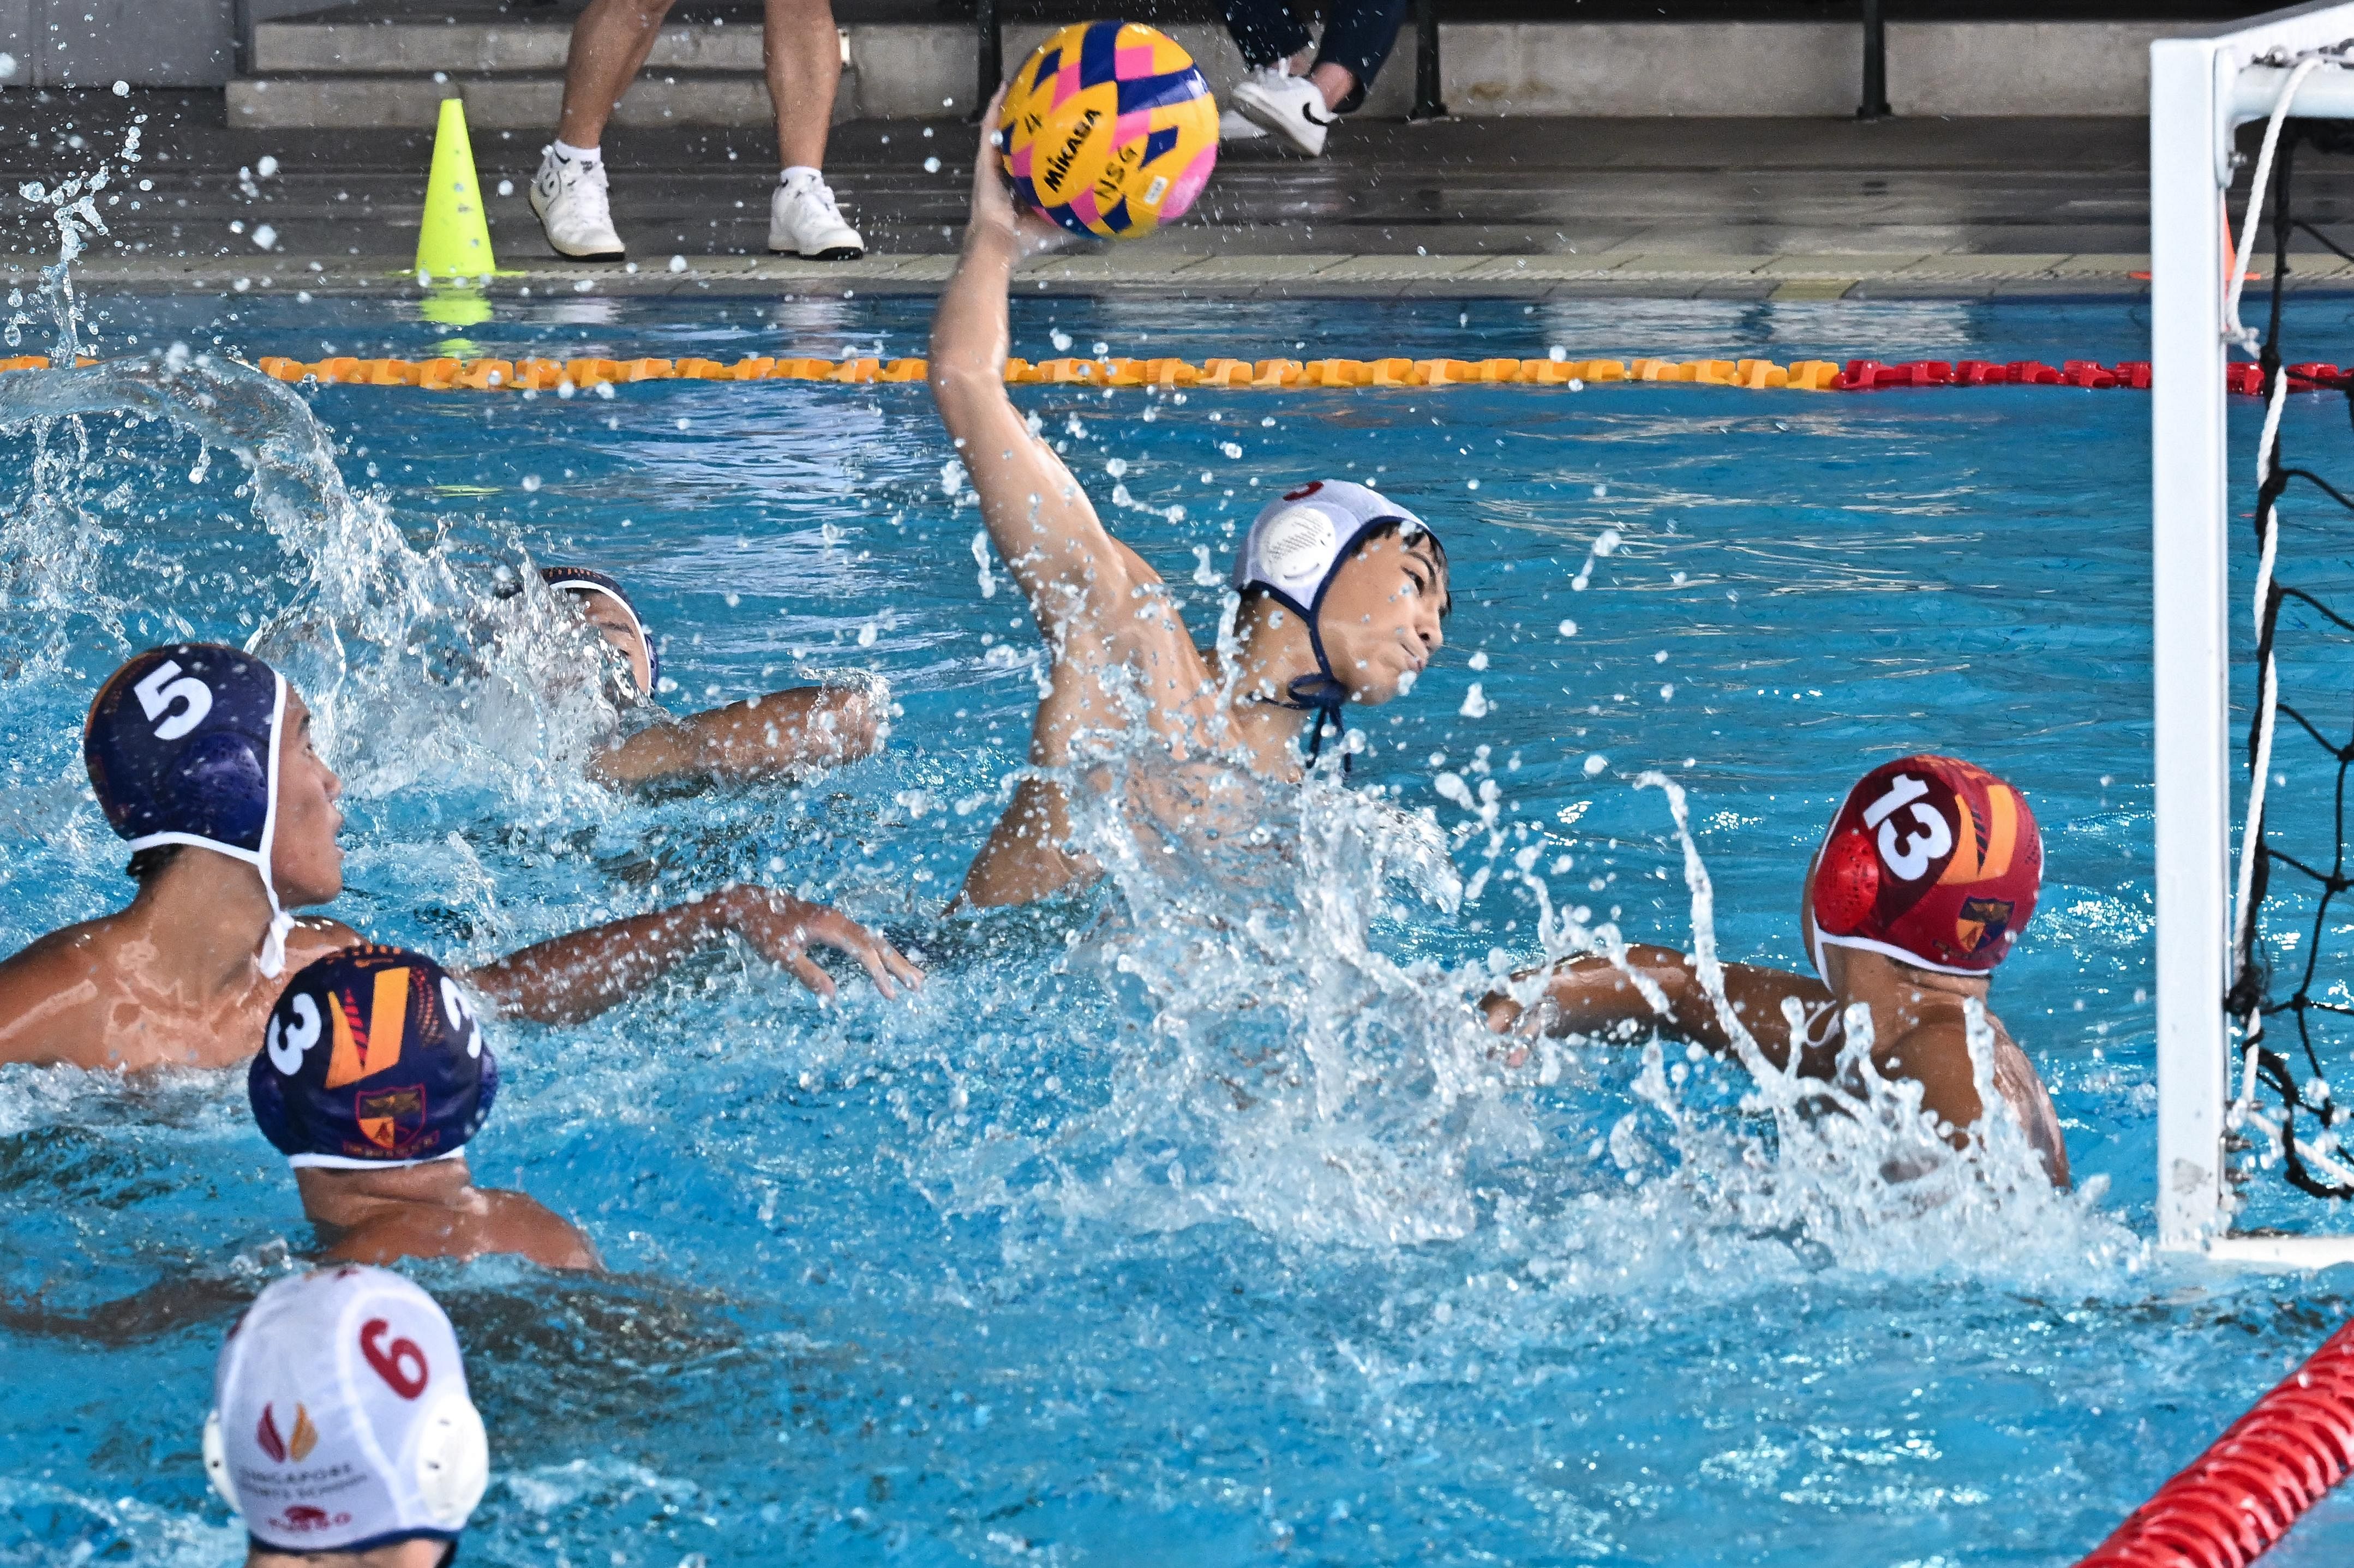 Returning player leads Sports School past ACS Barker to B Division water polo title